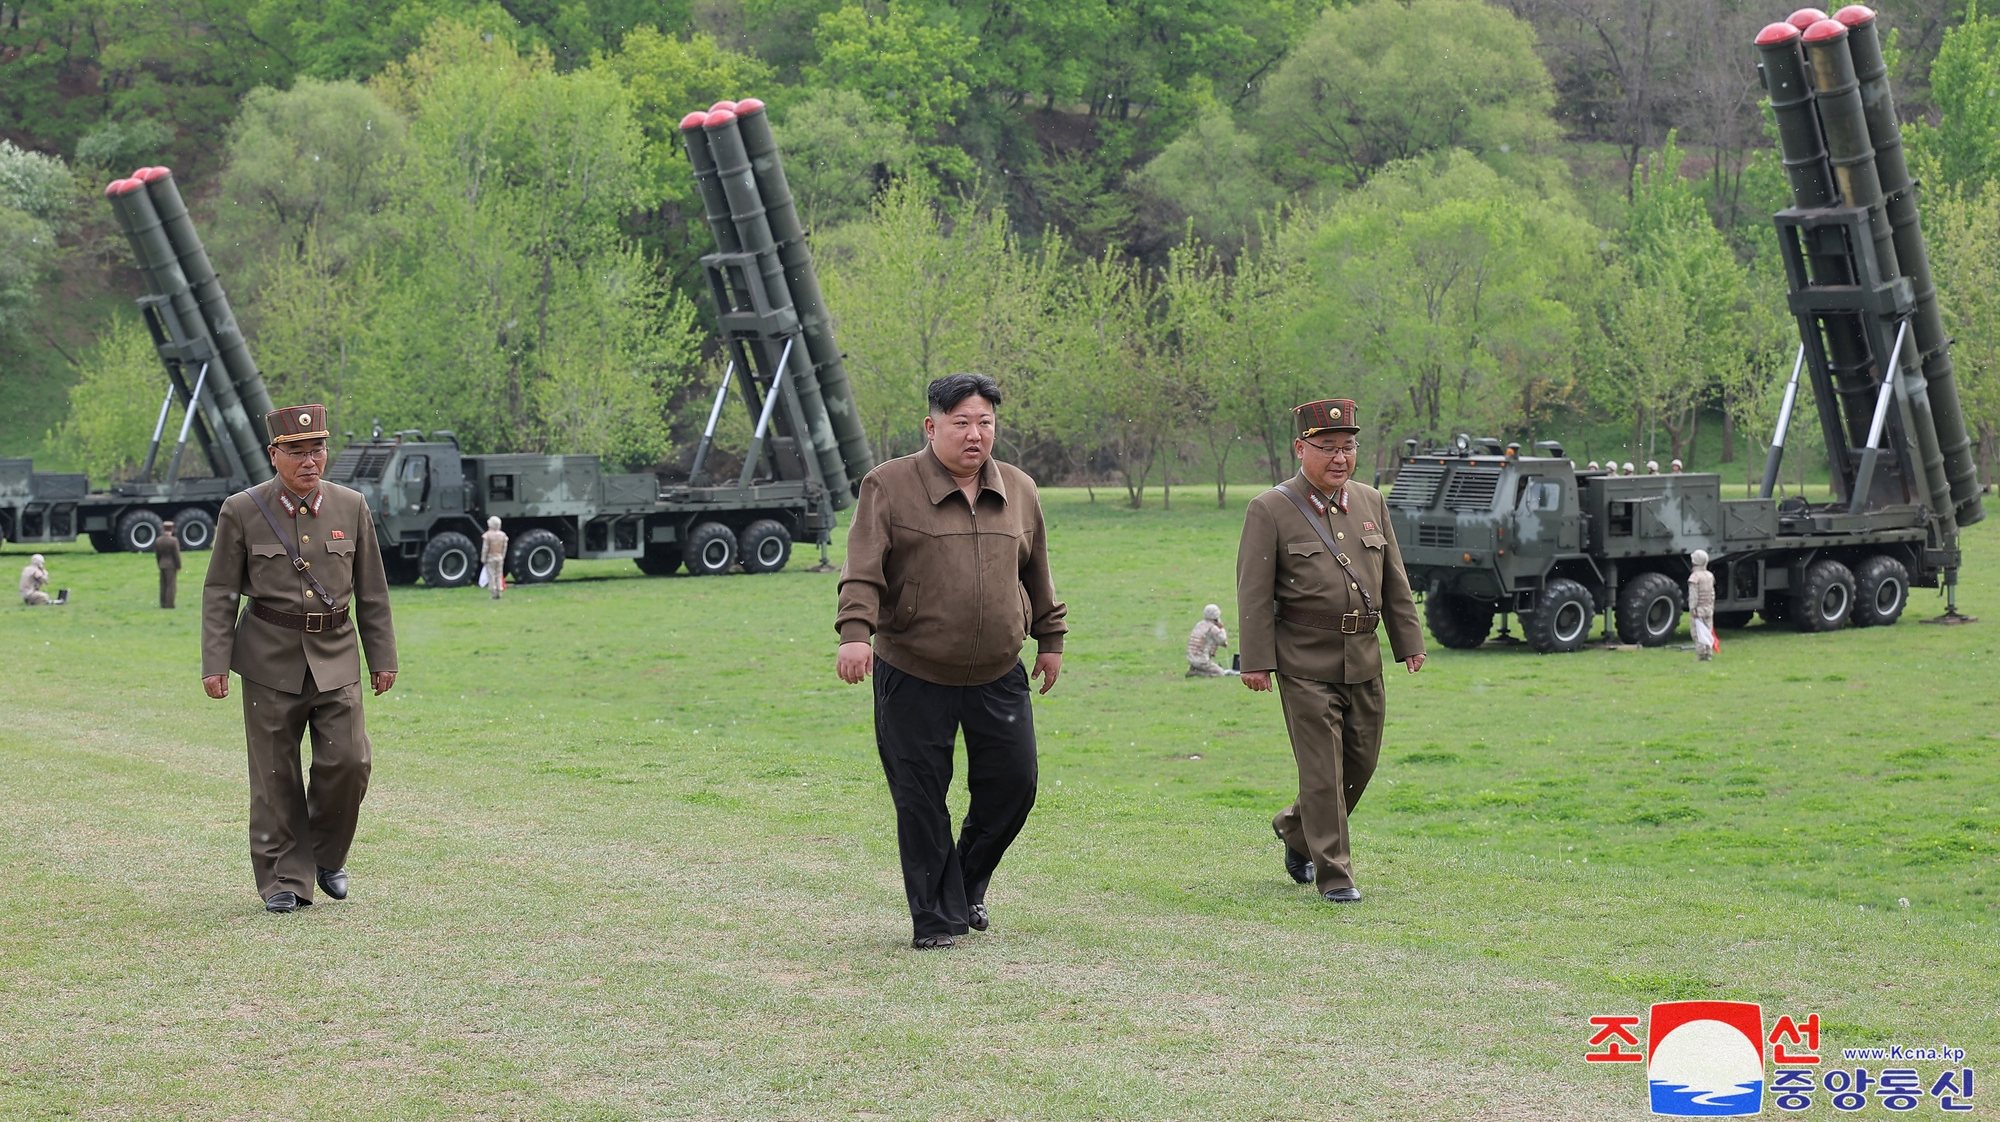 epa11294997 A photo released by the official North Korean Central News Agency (KCNA) shows North Korean leader Kim Jong Un (C) overseeing a simulated nuclear counterattack drill at an undisclosed location, North Korea, 22 April 2024 (issued 23 April 2024). According to KCNA, North leader Kim Jong Un on 22 April &#039;guided a combined tactical drill simulating a nuclear counterattack involving super-large multiple rocket artillerymen&#039;.  EPA/KCNA   EDITORIAL USE ONLY  EDITORIAL USE ONLY